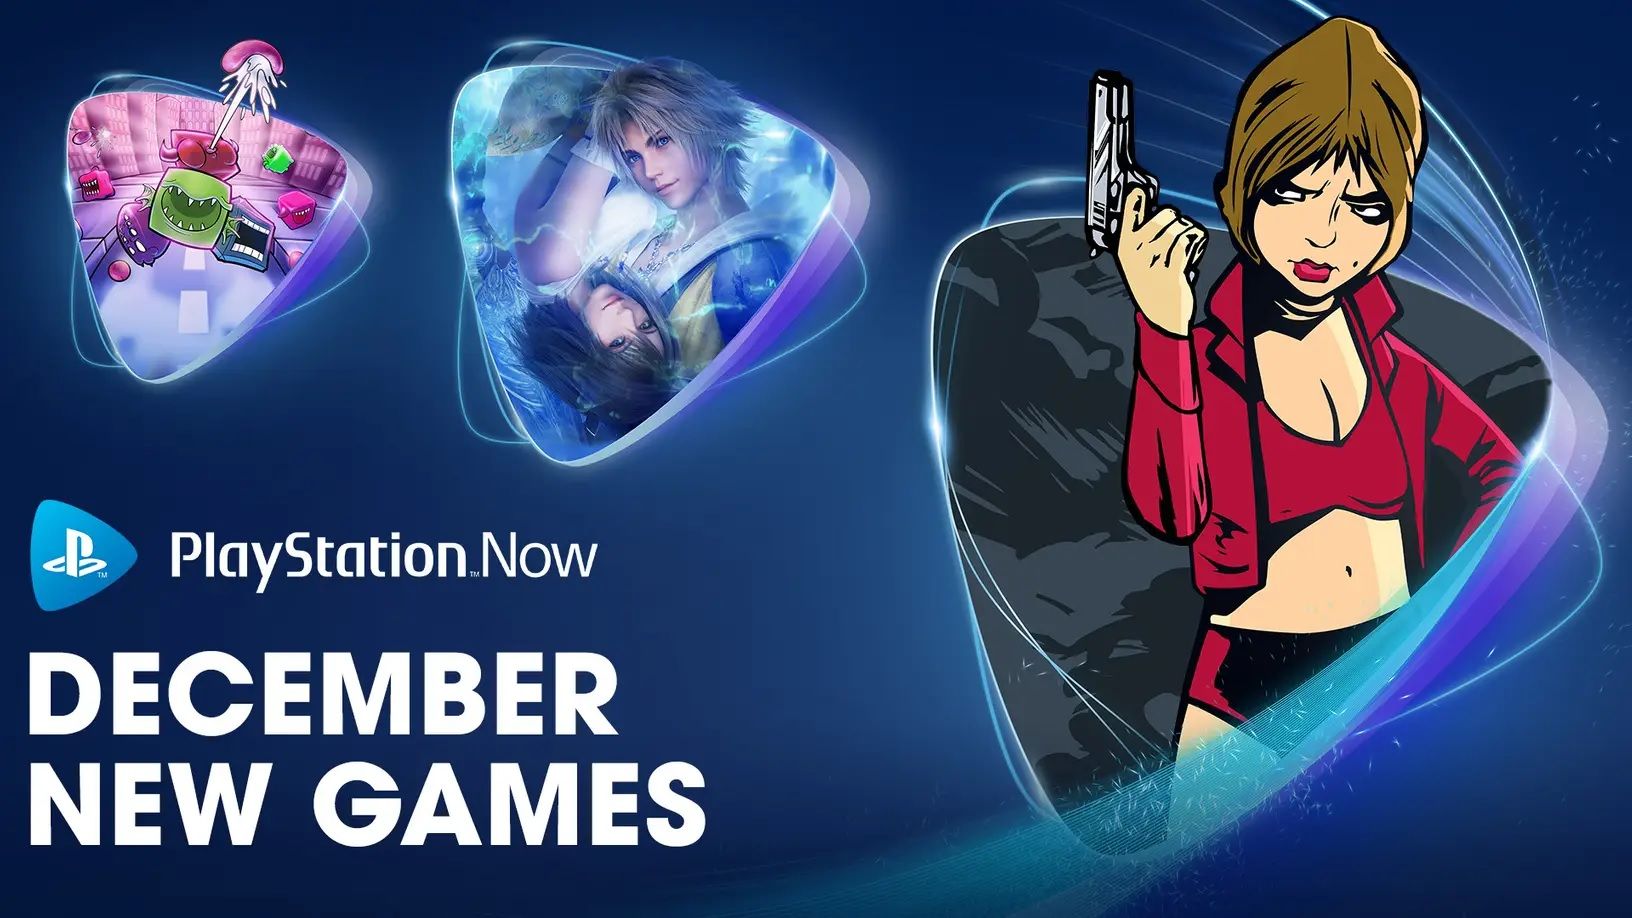 PlayStation Now Adding 4 New Games for December 2021